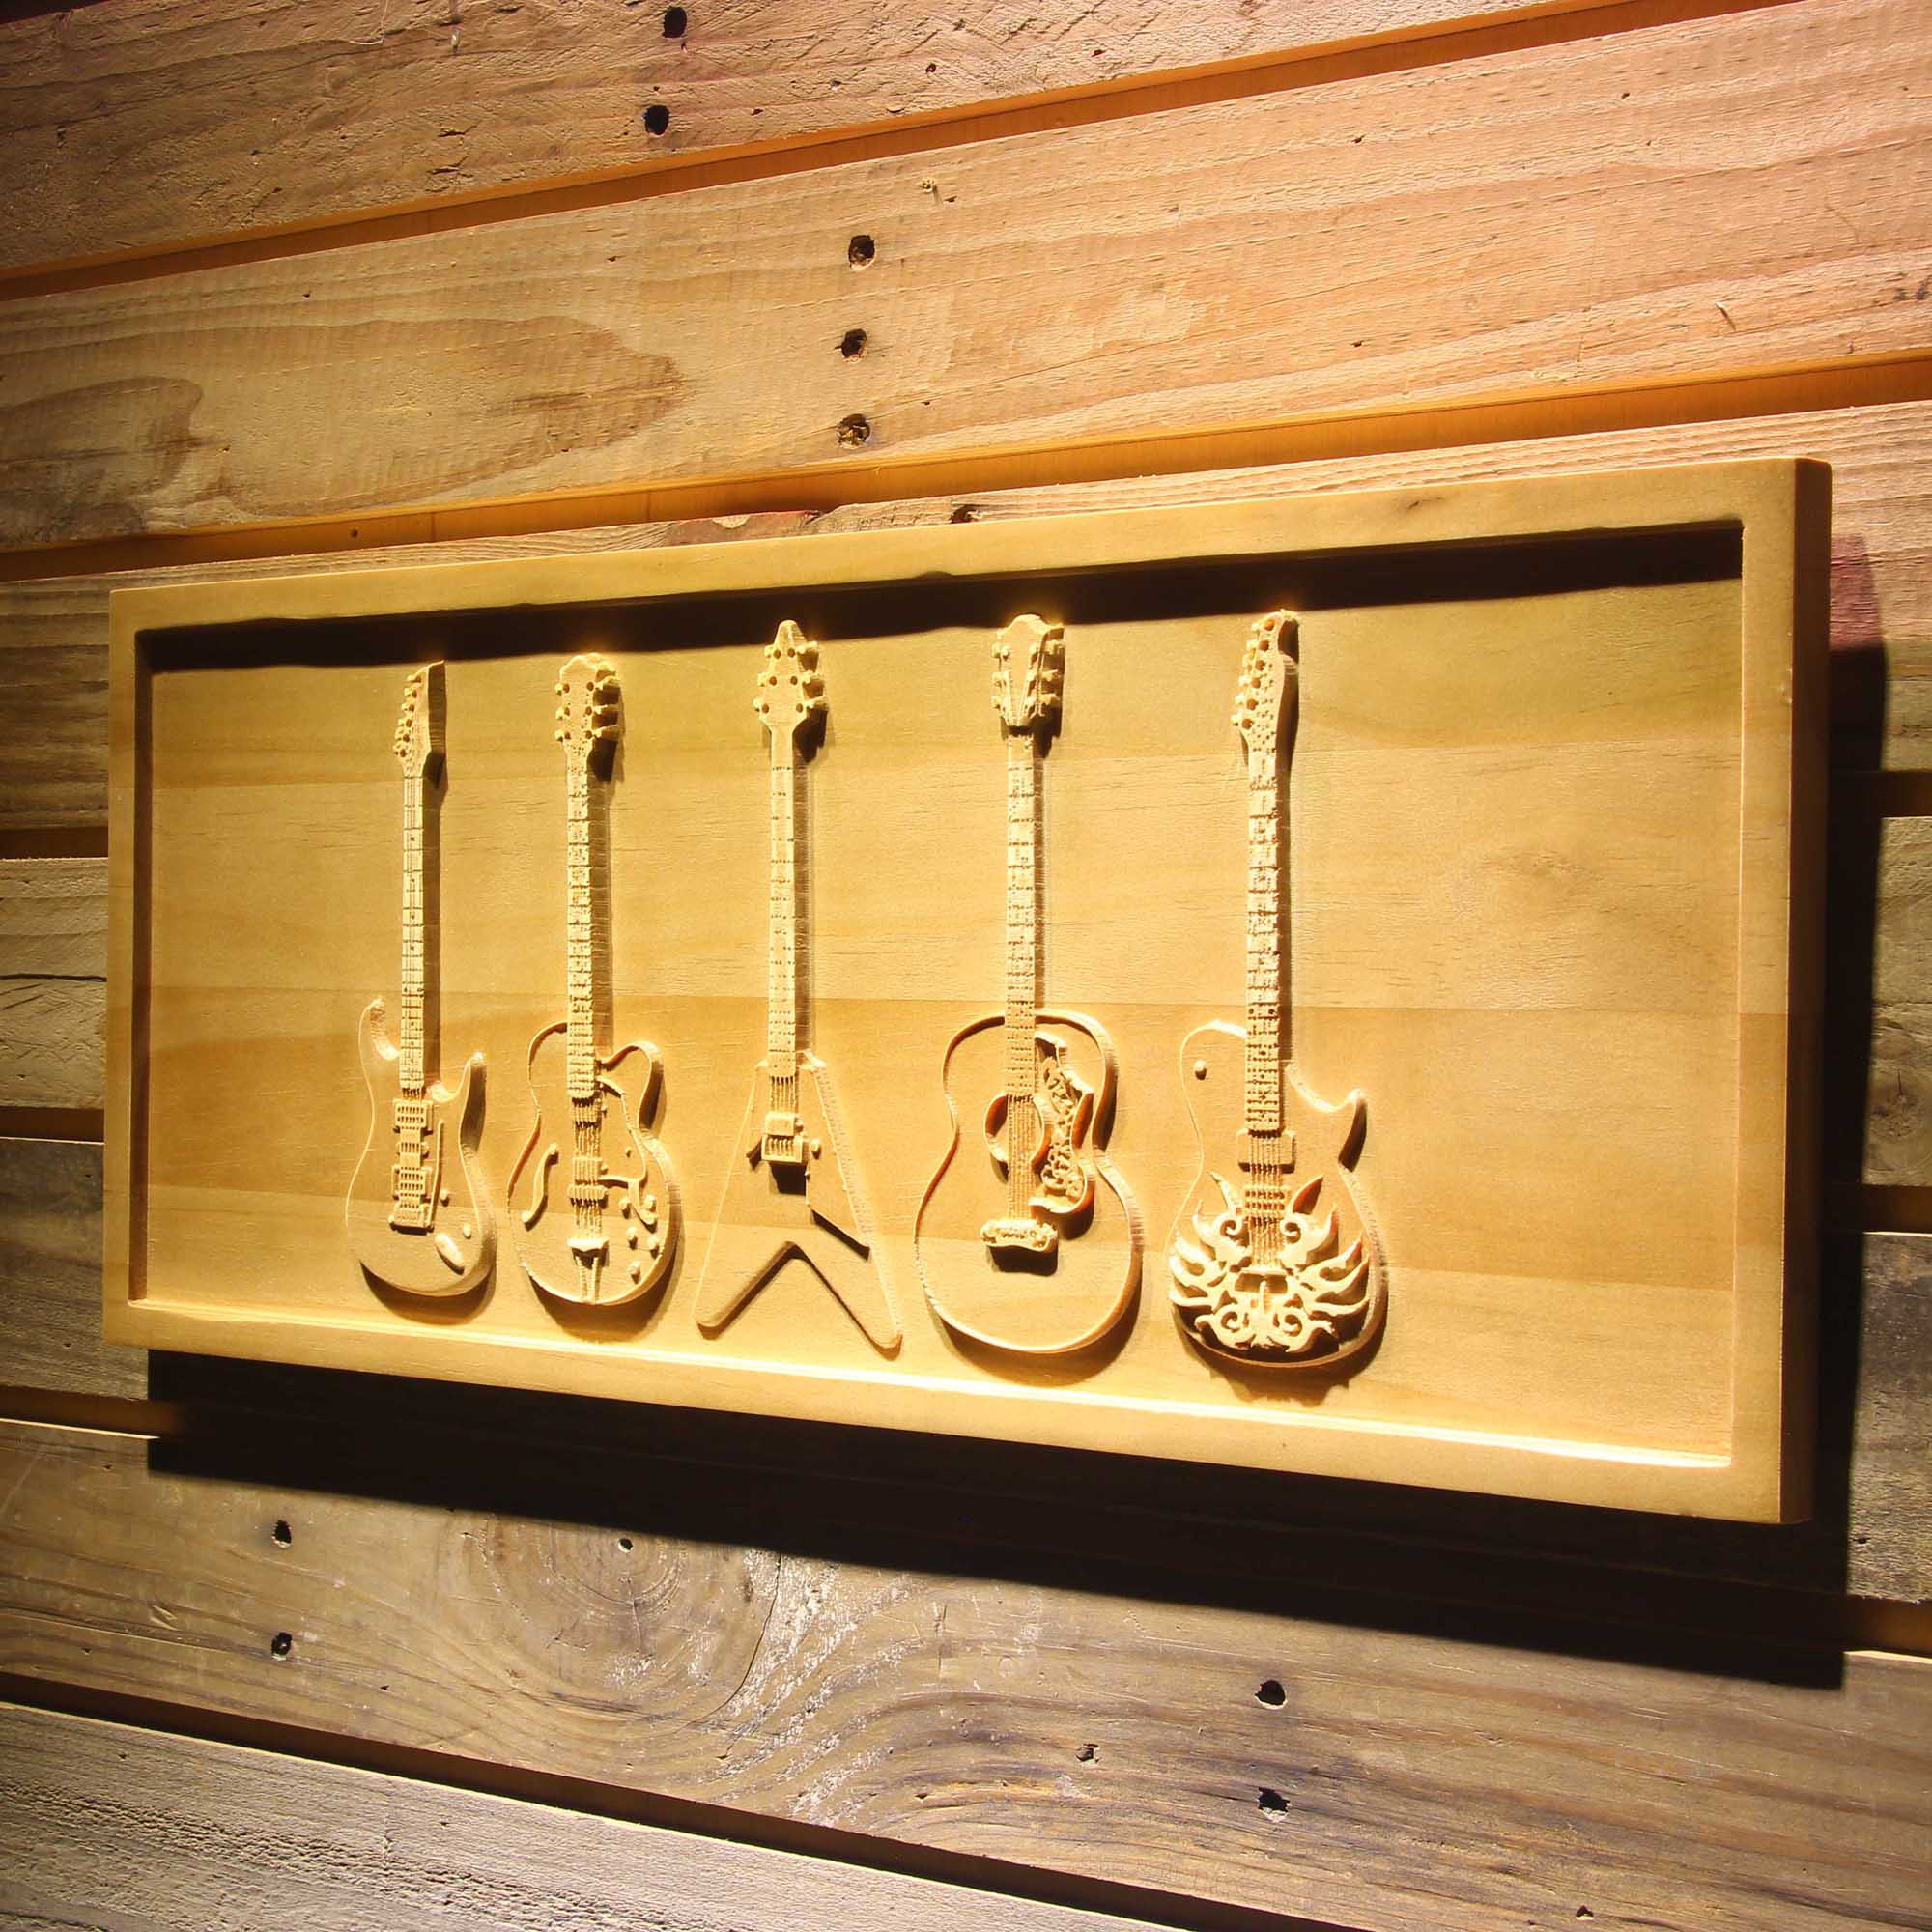 Guitar Weapons Band Room 3D Wooden Engrave Sign